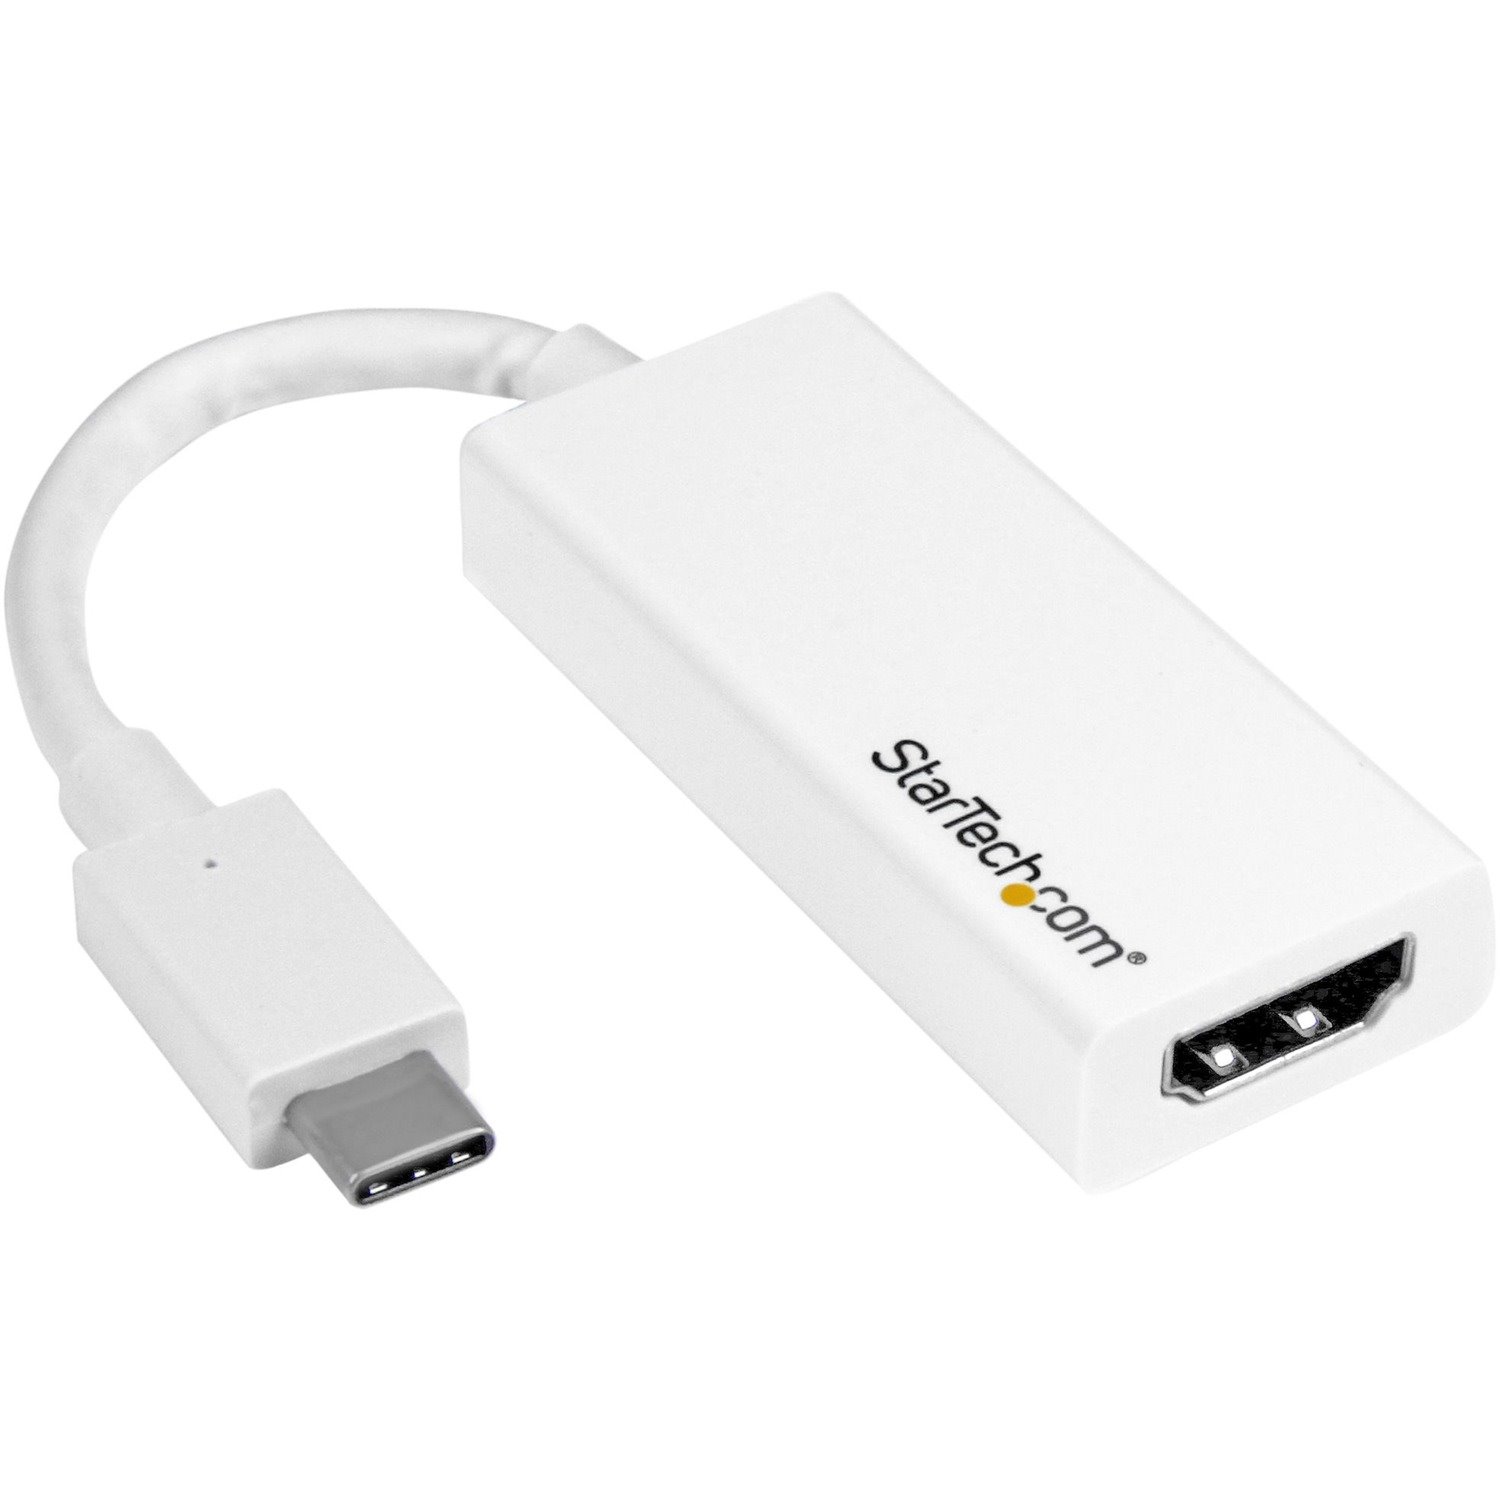 StarTech.com USB C to HDMI Adapter - White - 4K 60Hz - Thunderbolt 3 Compatible - USB Type C to HDMI Dongle Converter (CDP2HD4K60W)